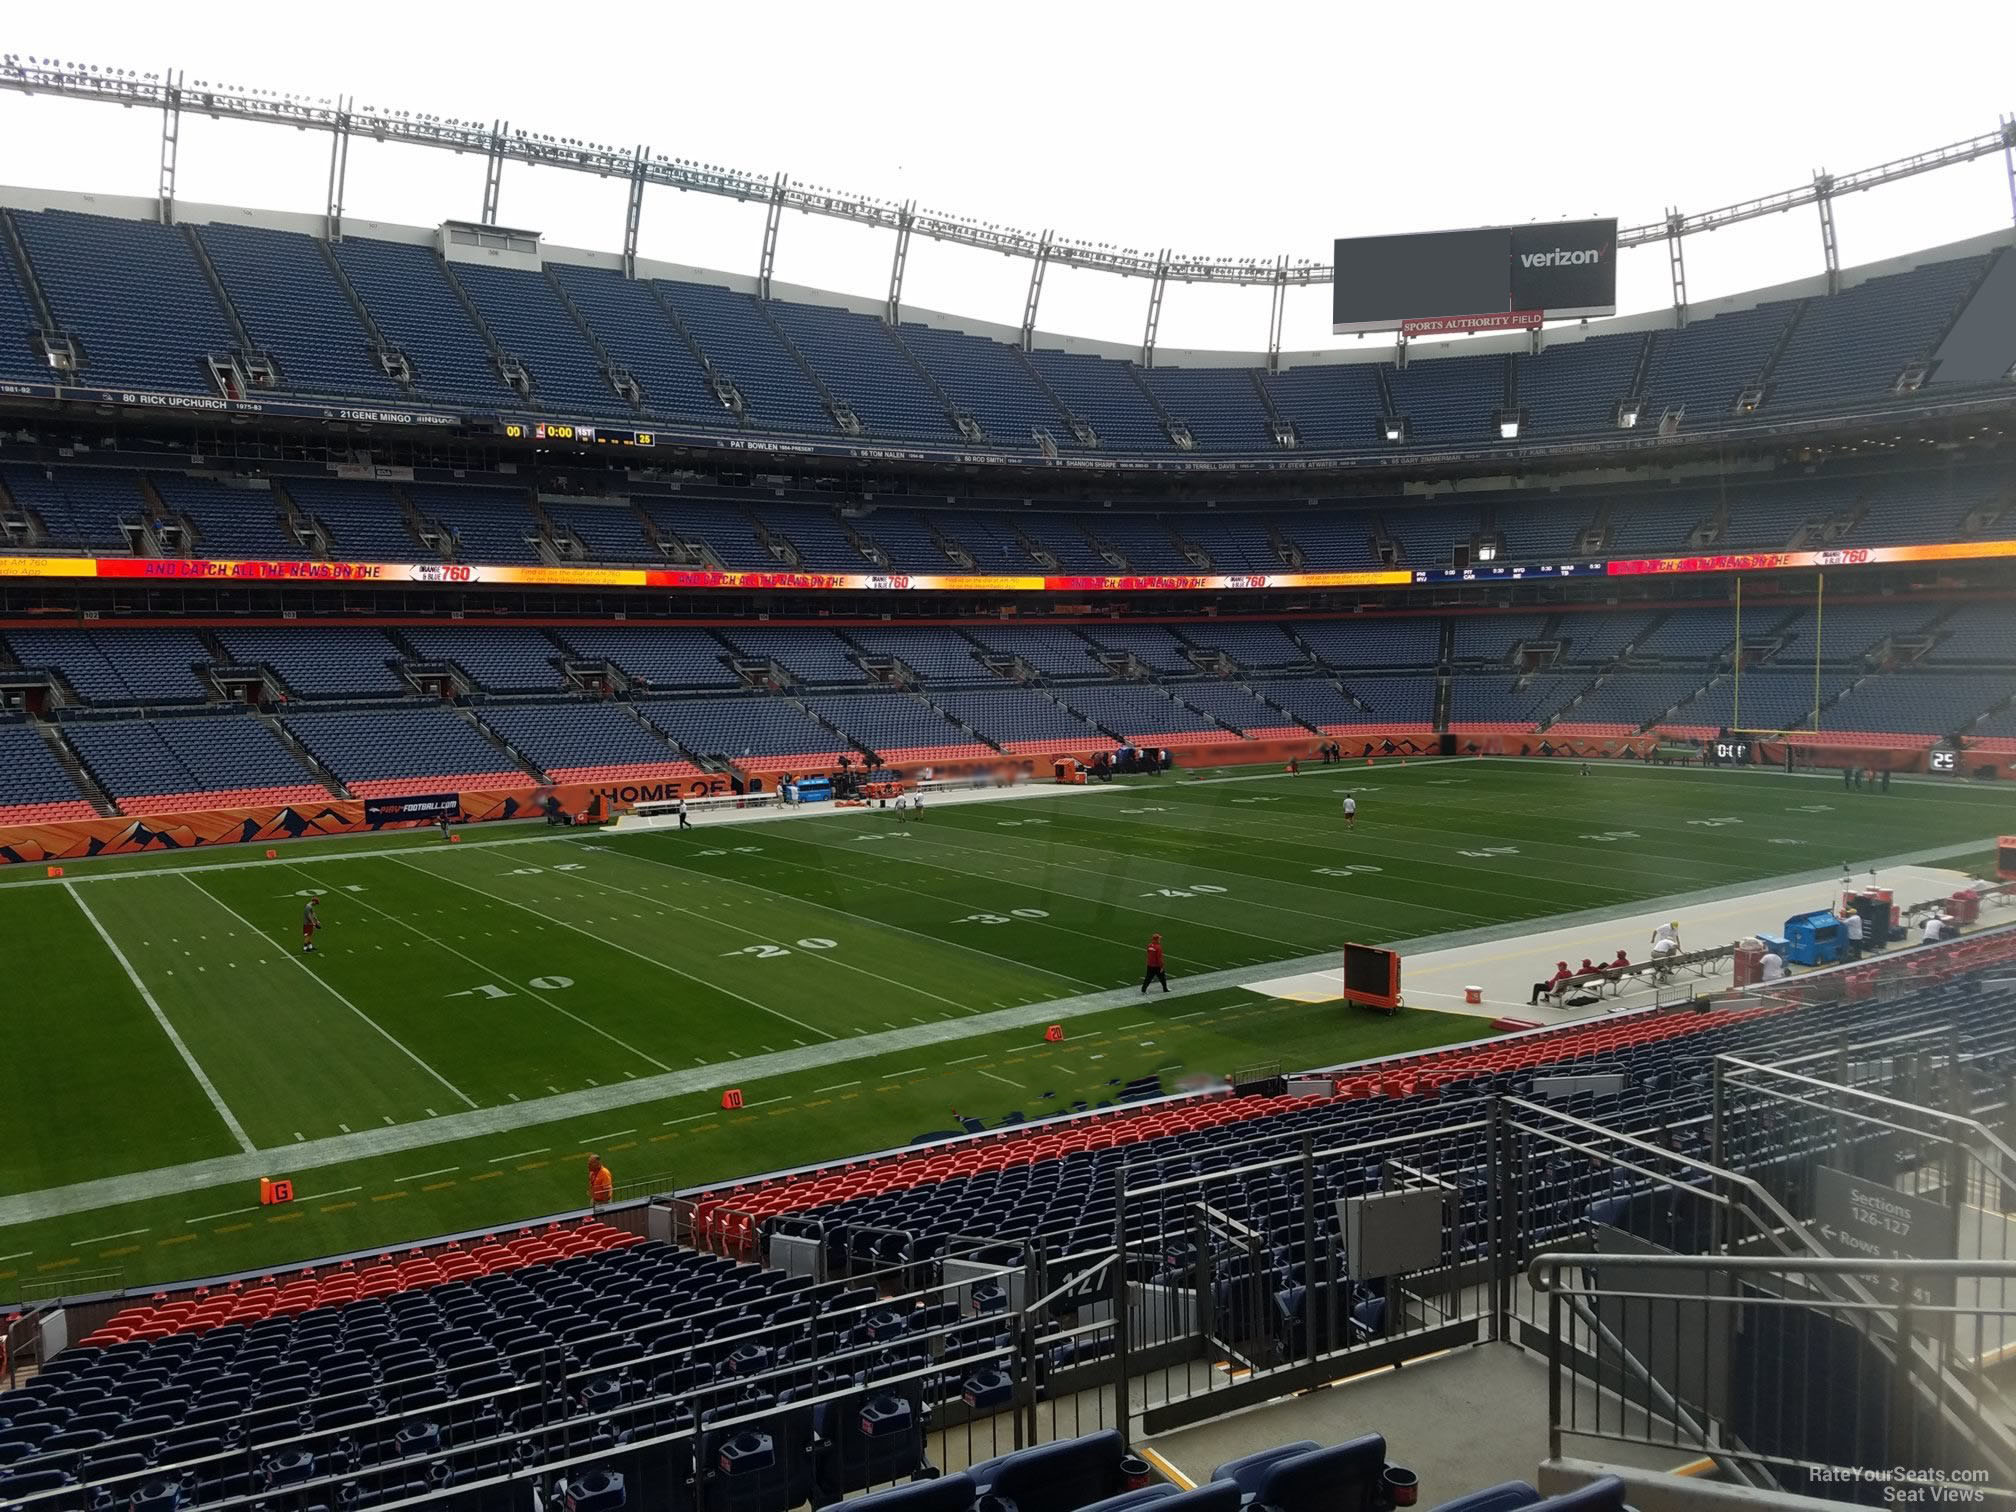 section 127, row 30 seat view  - empower field (at mile high)